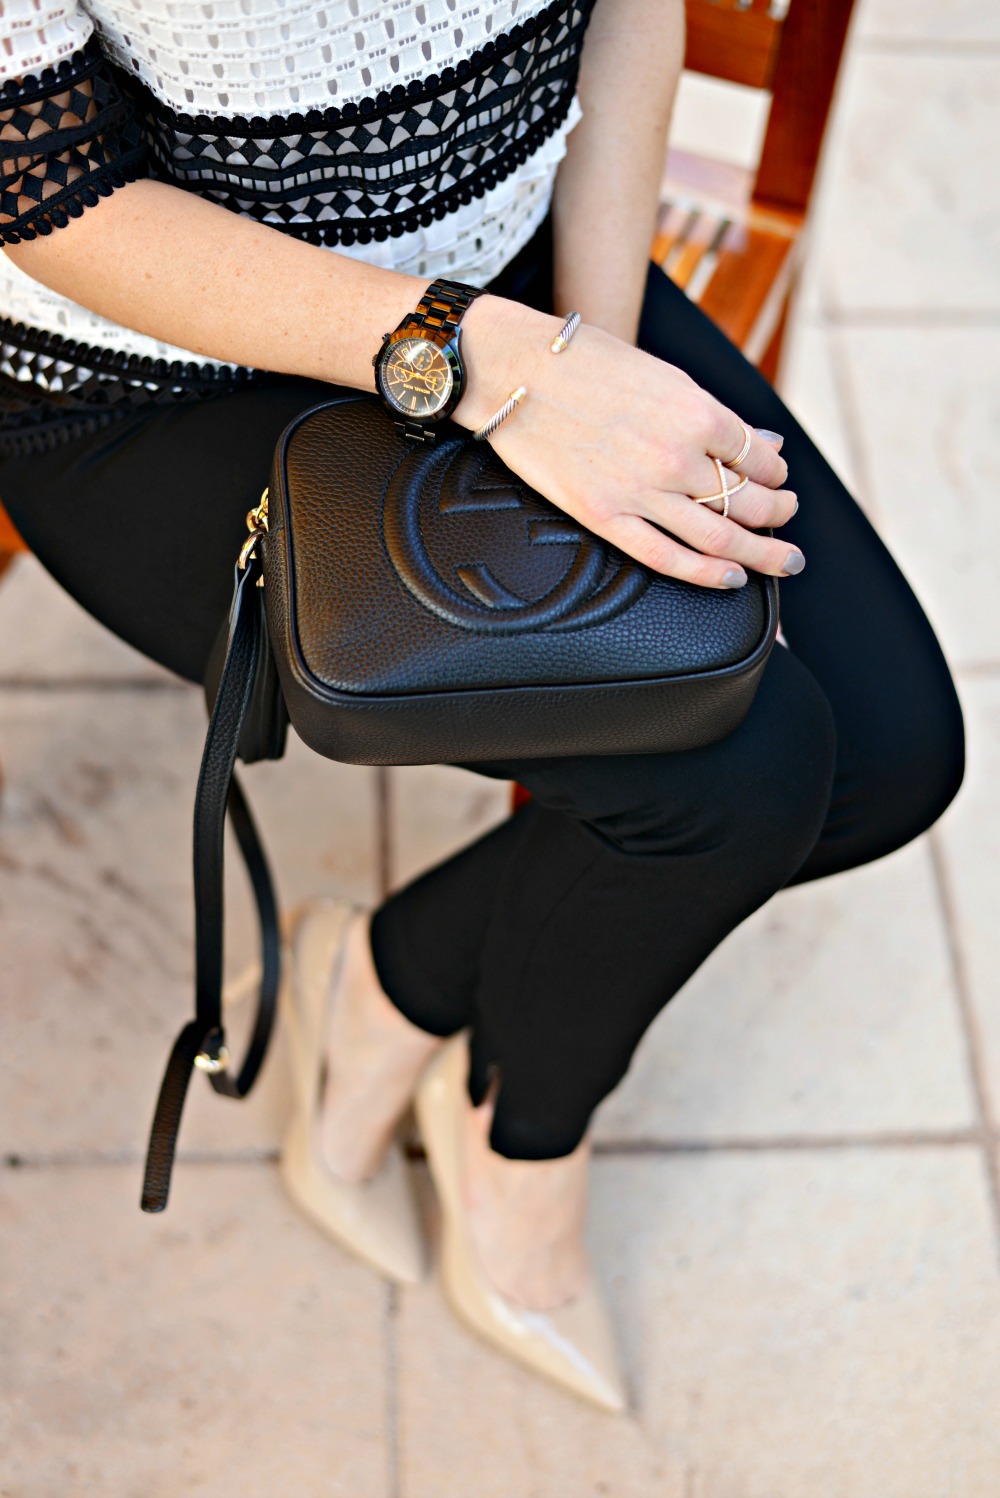 Gucci disco bag for work // the modern savvy